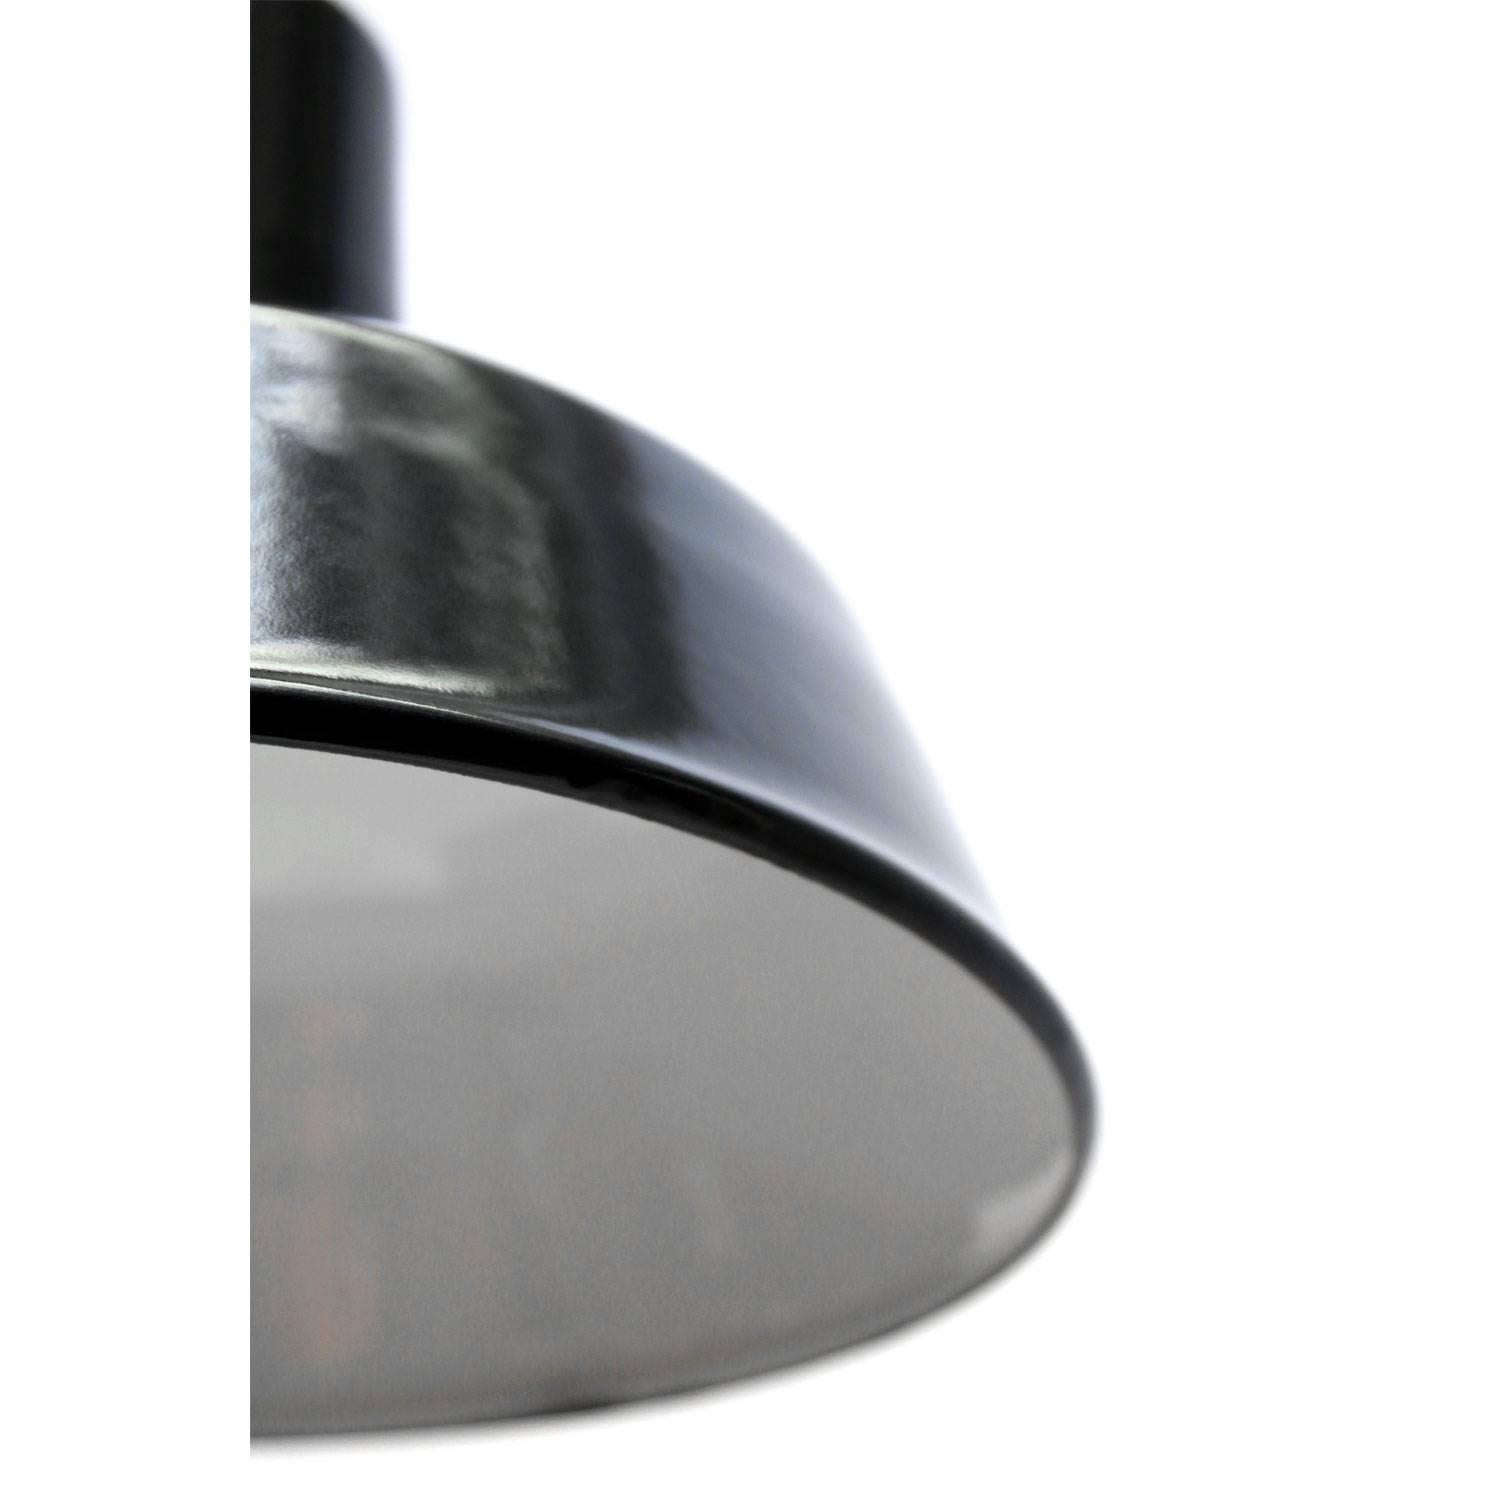 Factory hanging light. Black / very dark grey enamel, white interior.
E27 or E26 max. 150W.

All lamps have been made suitable by international standards for incandescent light bulbs, energy-efficient and LED bulbs with an E26/E27 socket, new